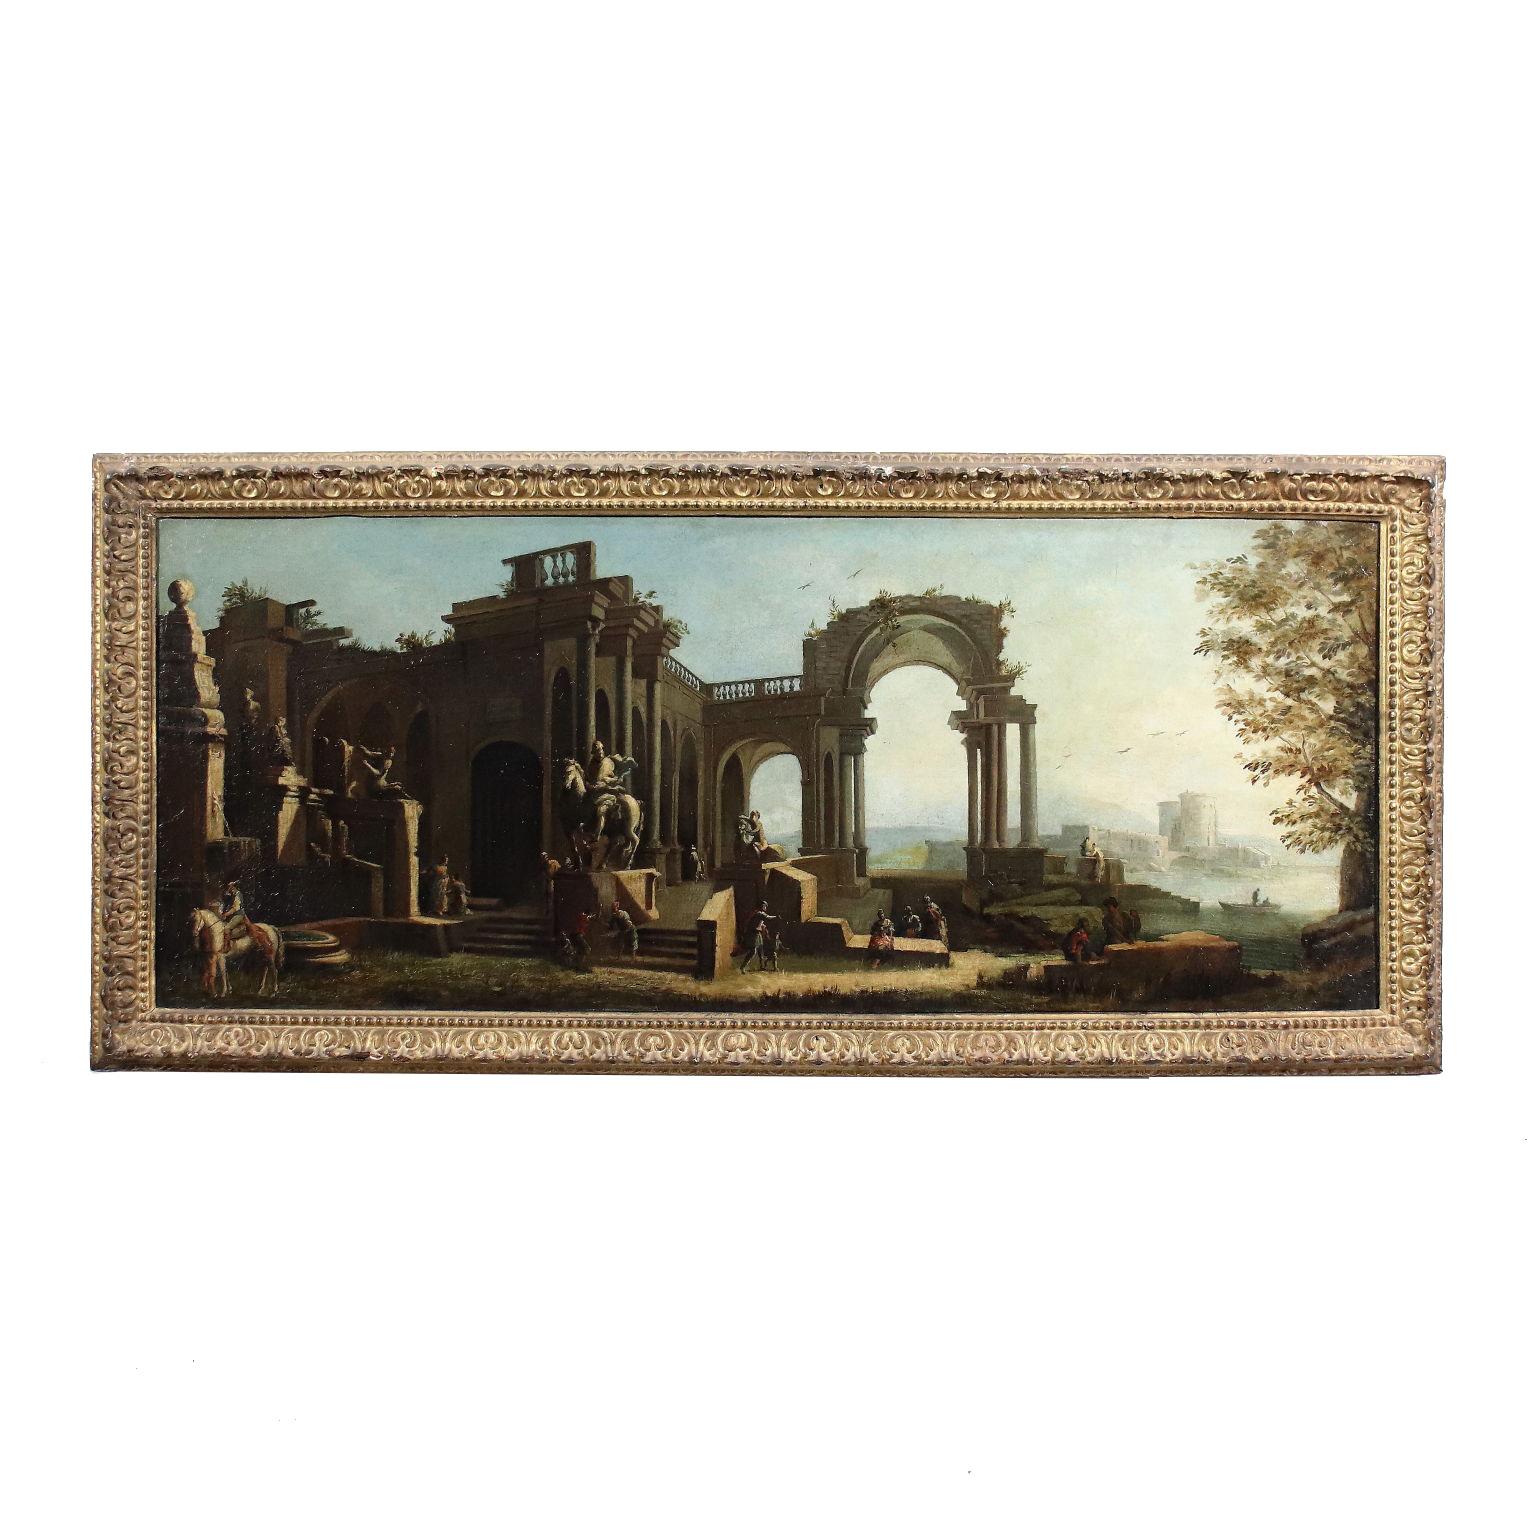 Unknown Landscape Painting - Architectural Capriccio with Figures, XVIIIth century